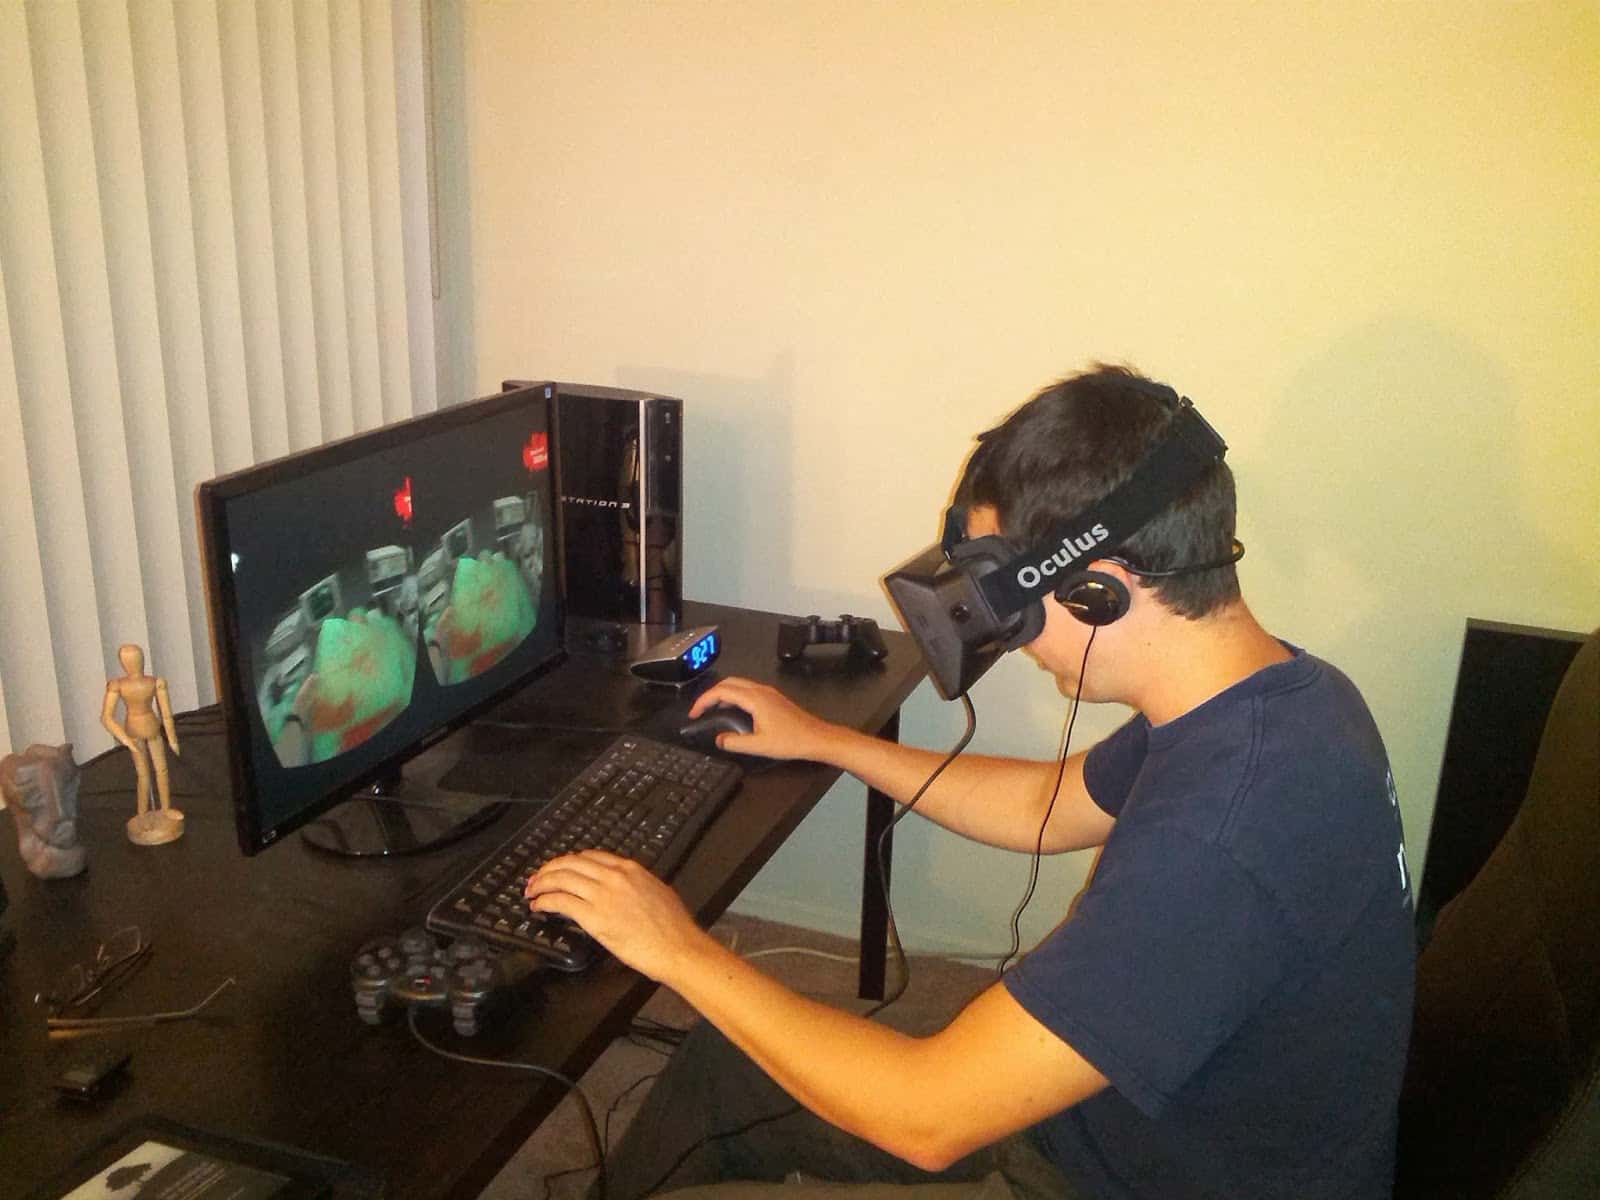 Oculus Rift For A New 3d Game Experience The Gaming Experience Has Improved Over The Years